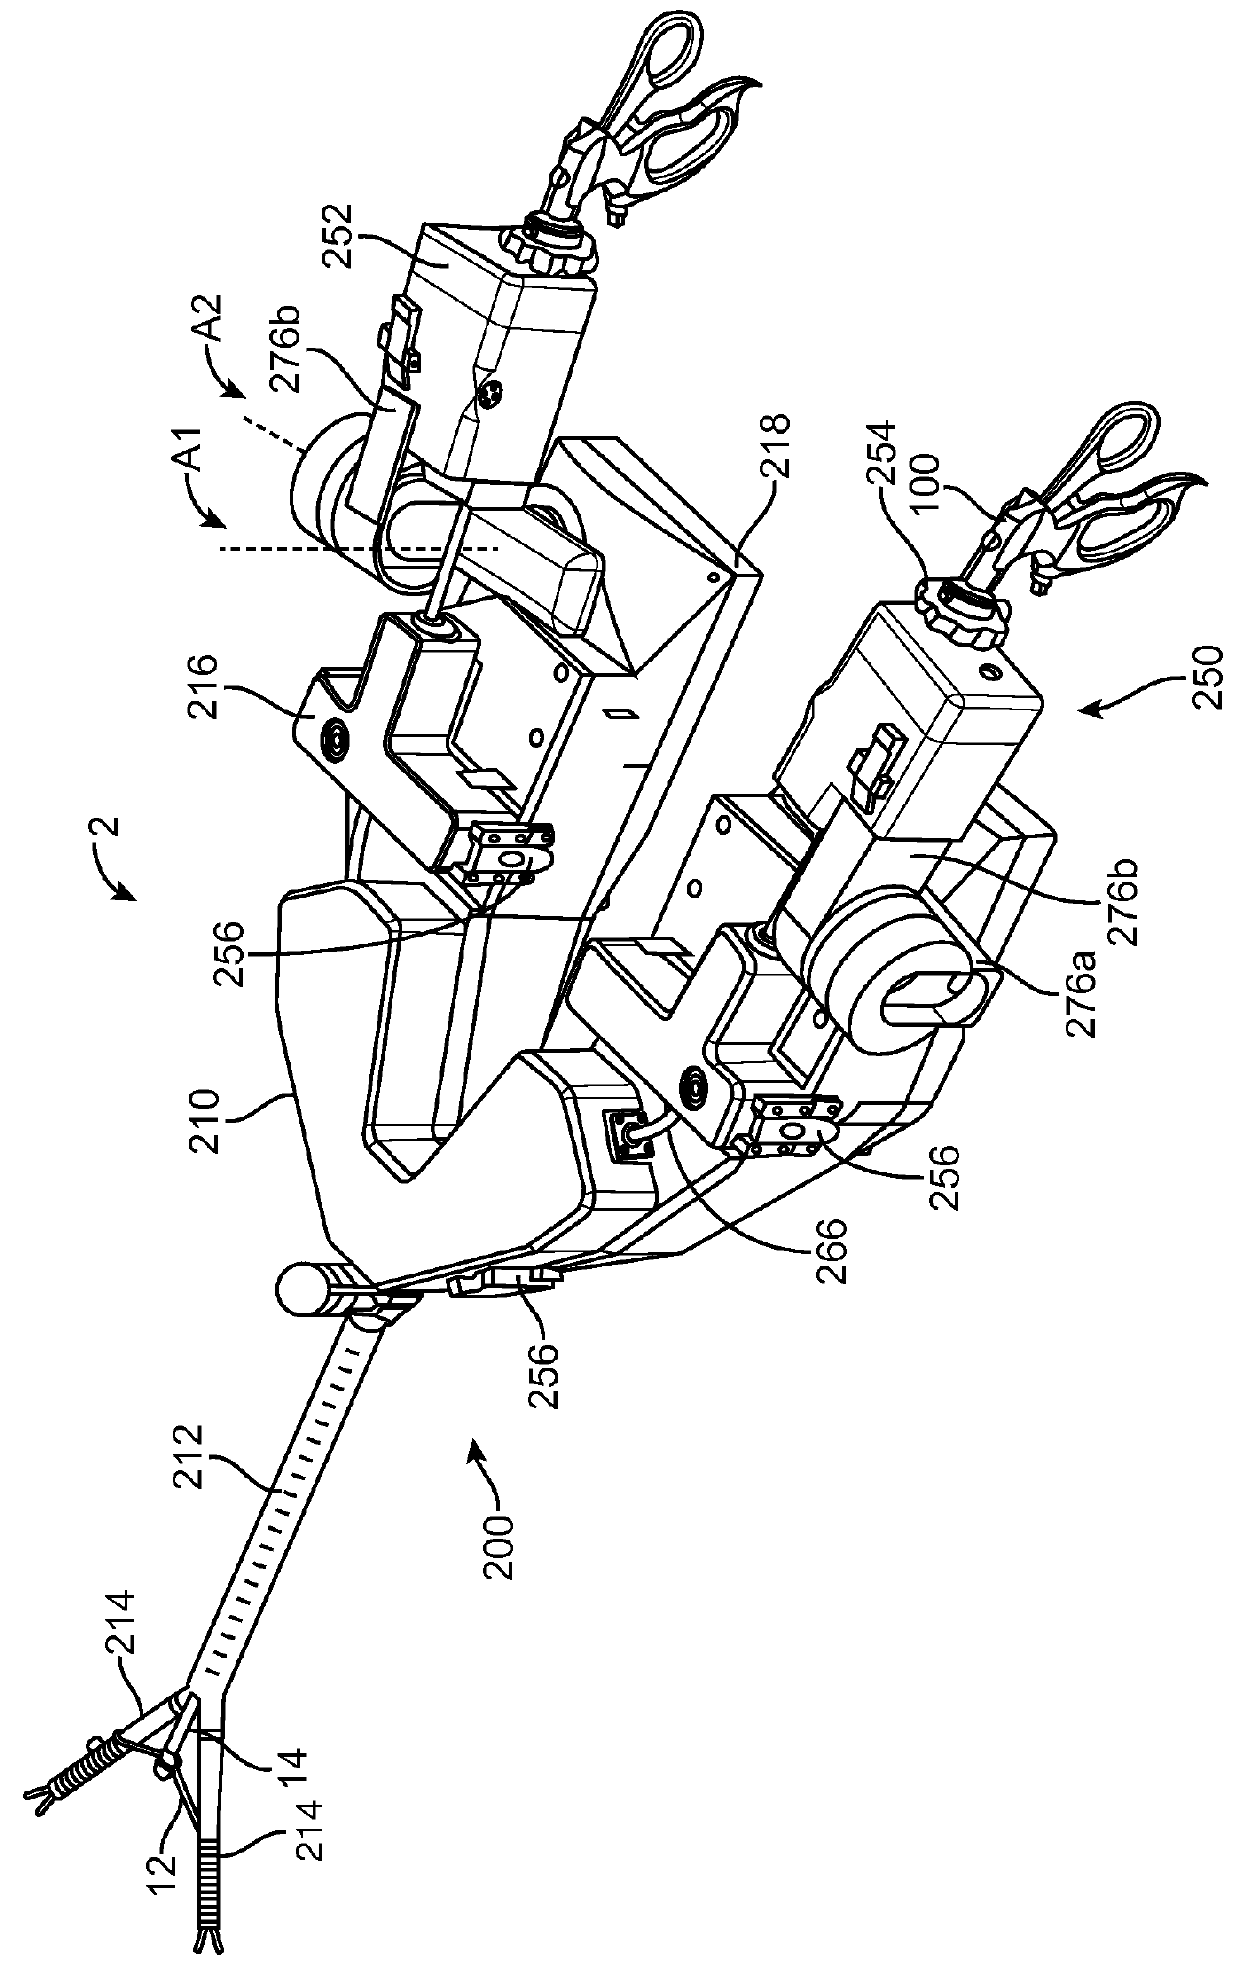 Mechanized multi-instrument surgical system